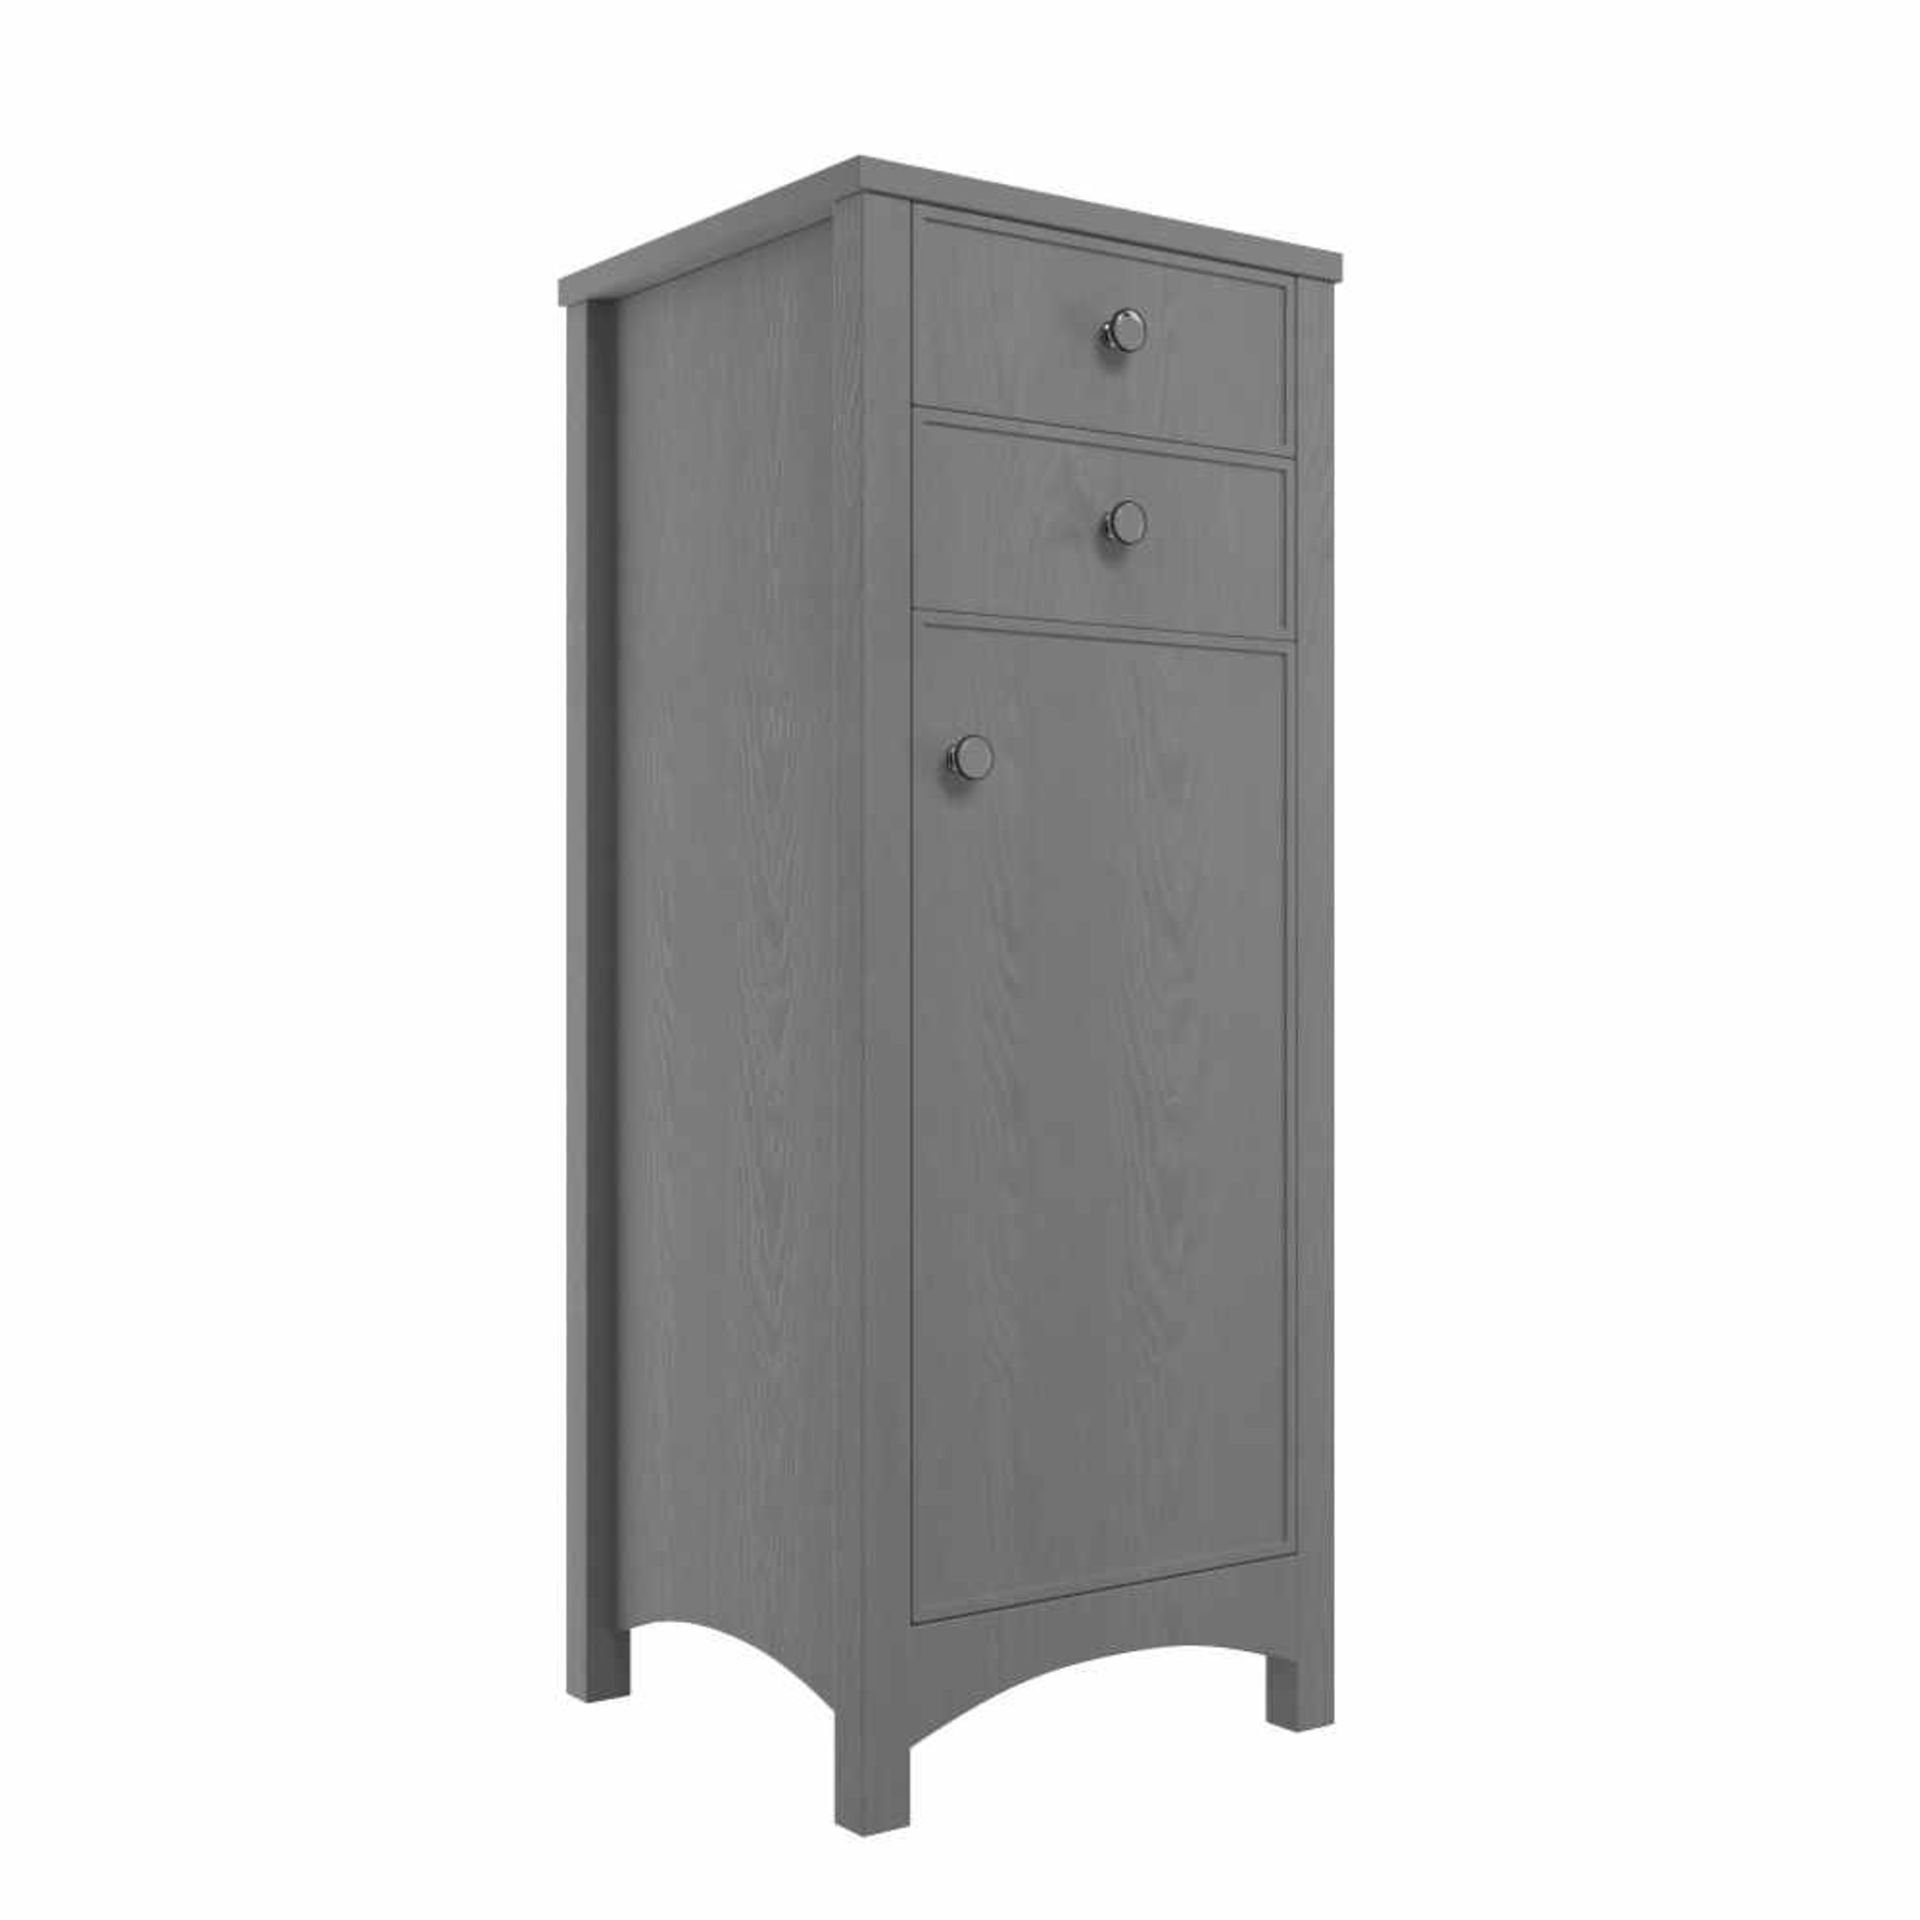 New (Y63) Lucia 465mm Tall Boy Unit In Grey Ash. A Truly Transitional Range Which Seamlessly ... - Image 2 of 3